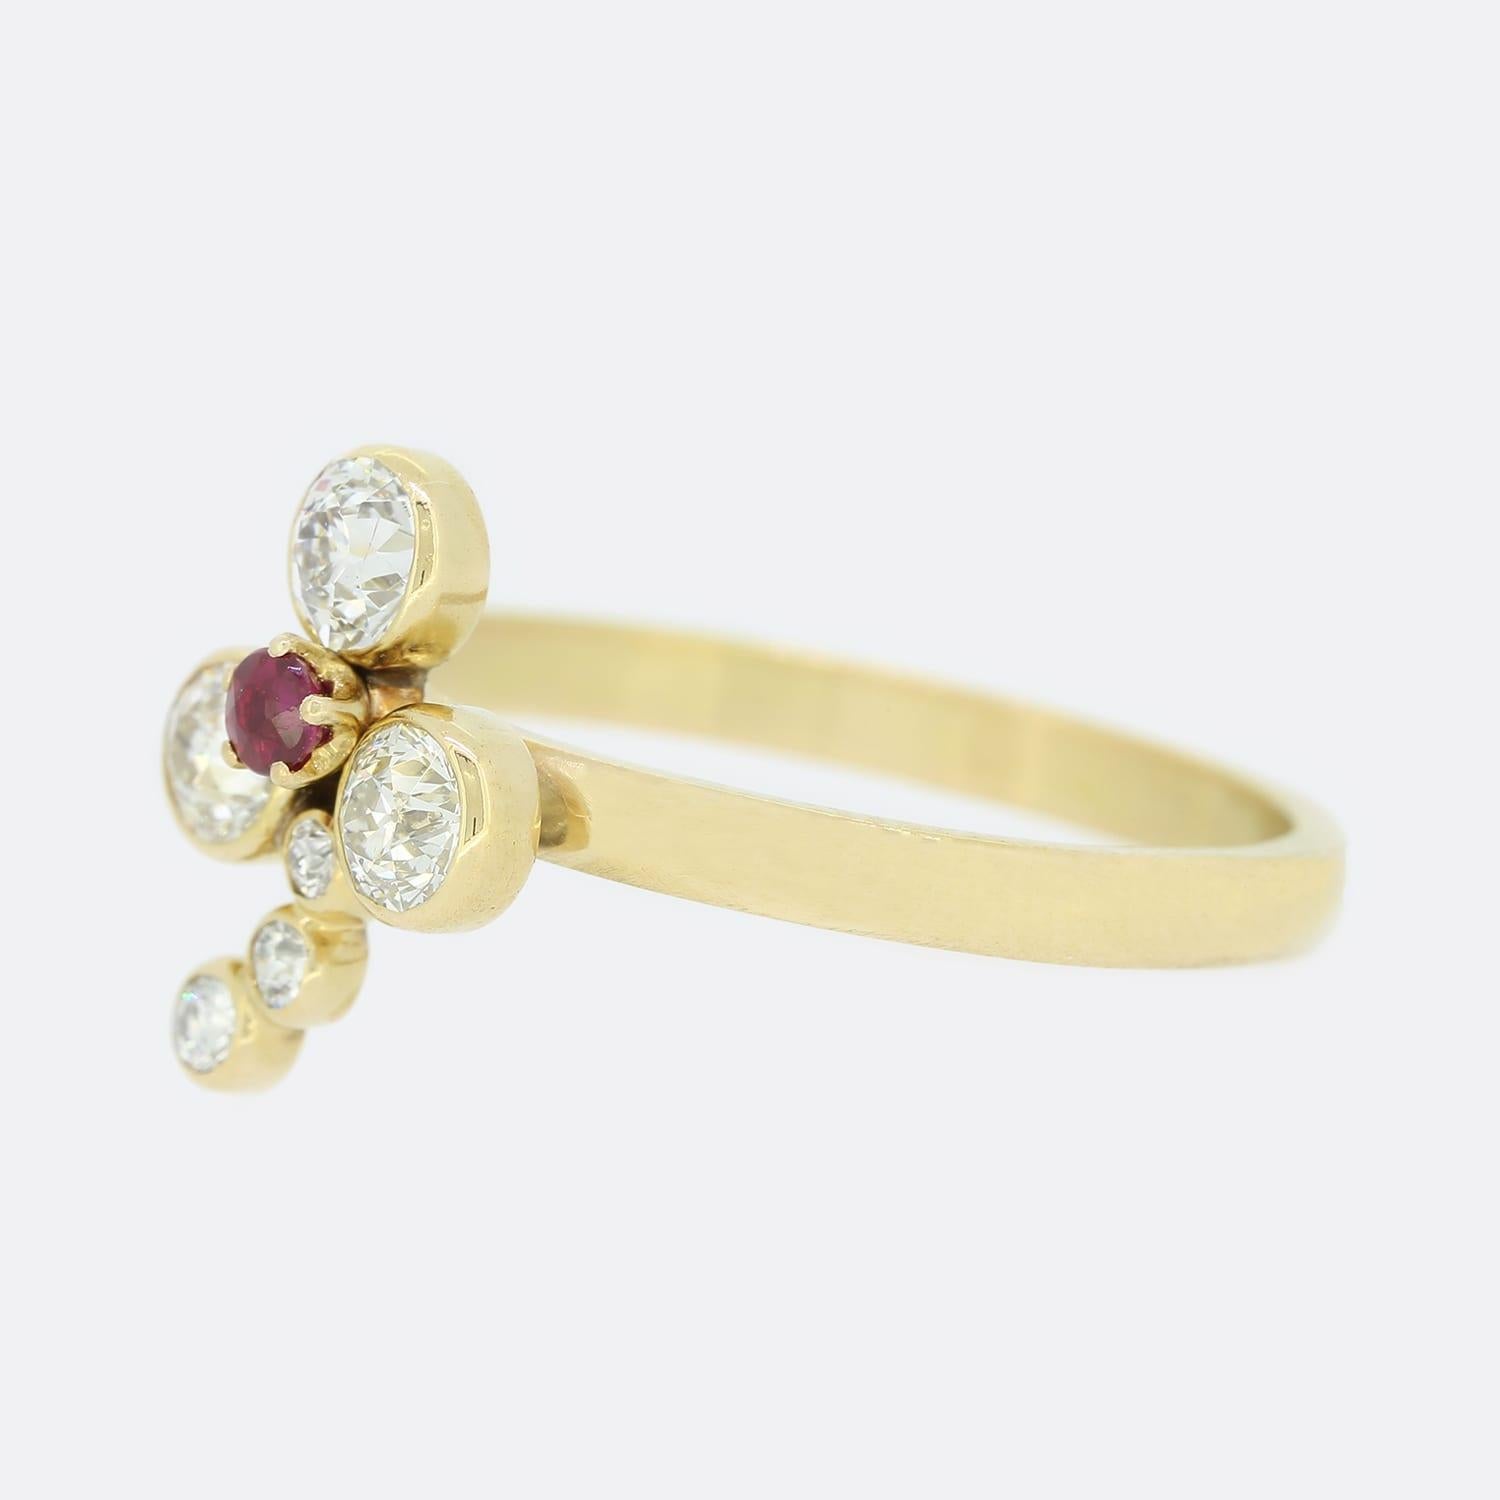 This is a beautiful, 18ct yellow gold diamond and ruby clover ring. The ring features six old cut diamonds and one central ruby in a clover motif crafted in 18ct yellow gold.
The ring started life as a Victorian stick pin but has been transformed